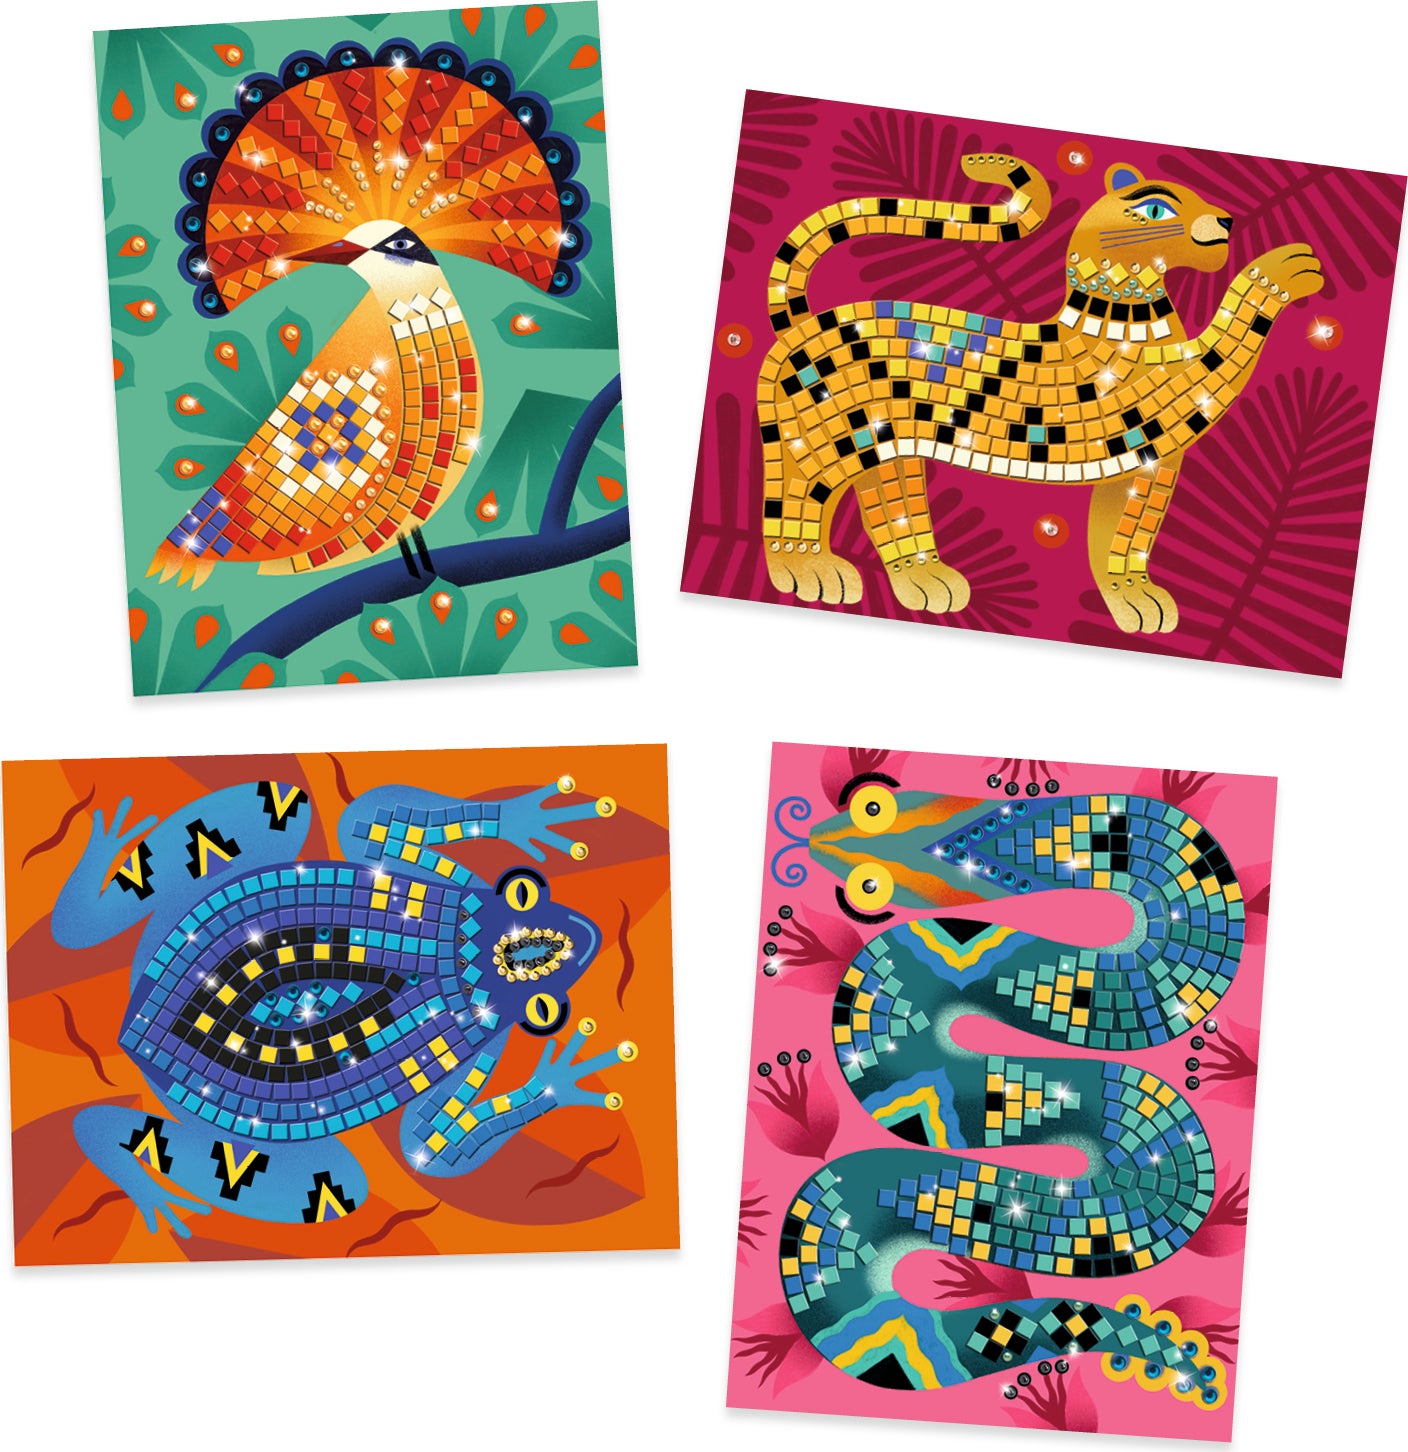 Deep in the Jungle Sticker and Jewel Mosaic Craft Kit